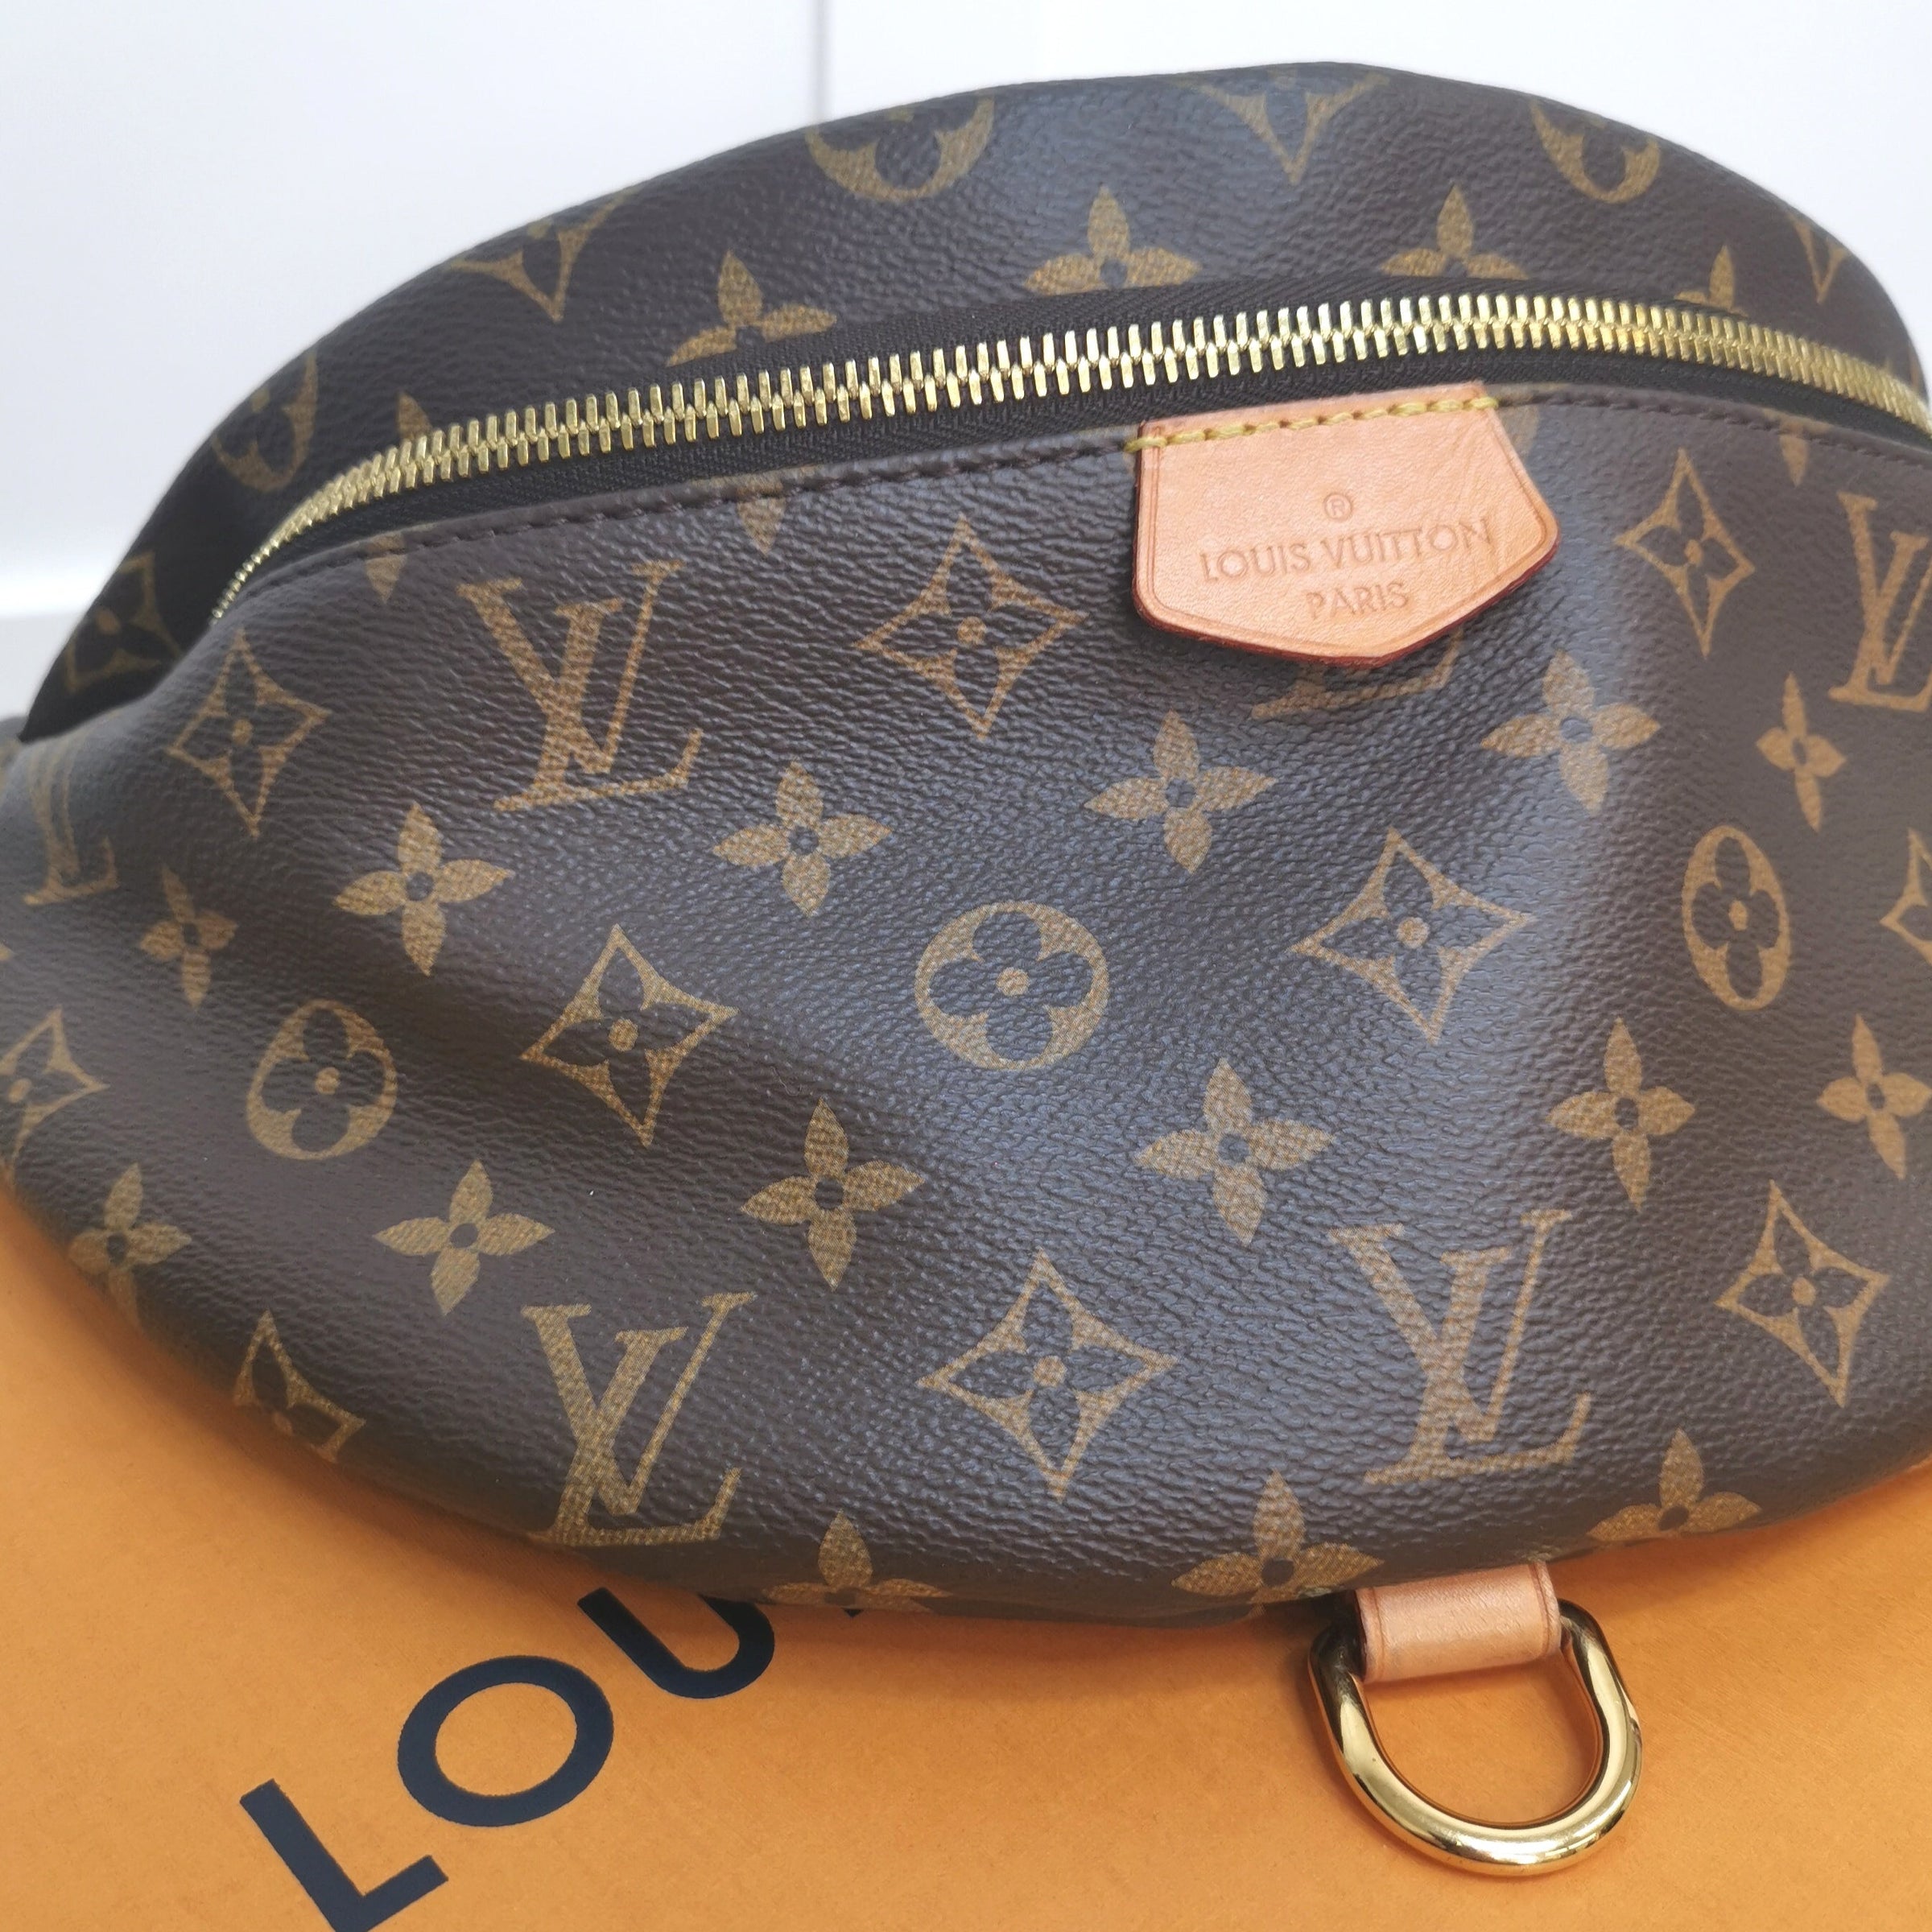 Discovery PM Bumbag  Luxury Monogram Eclipse Canvas Grey  LOUIS VUITTON